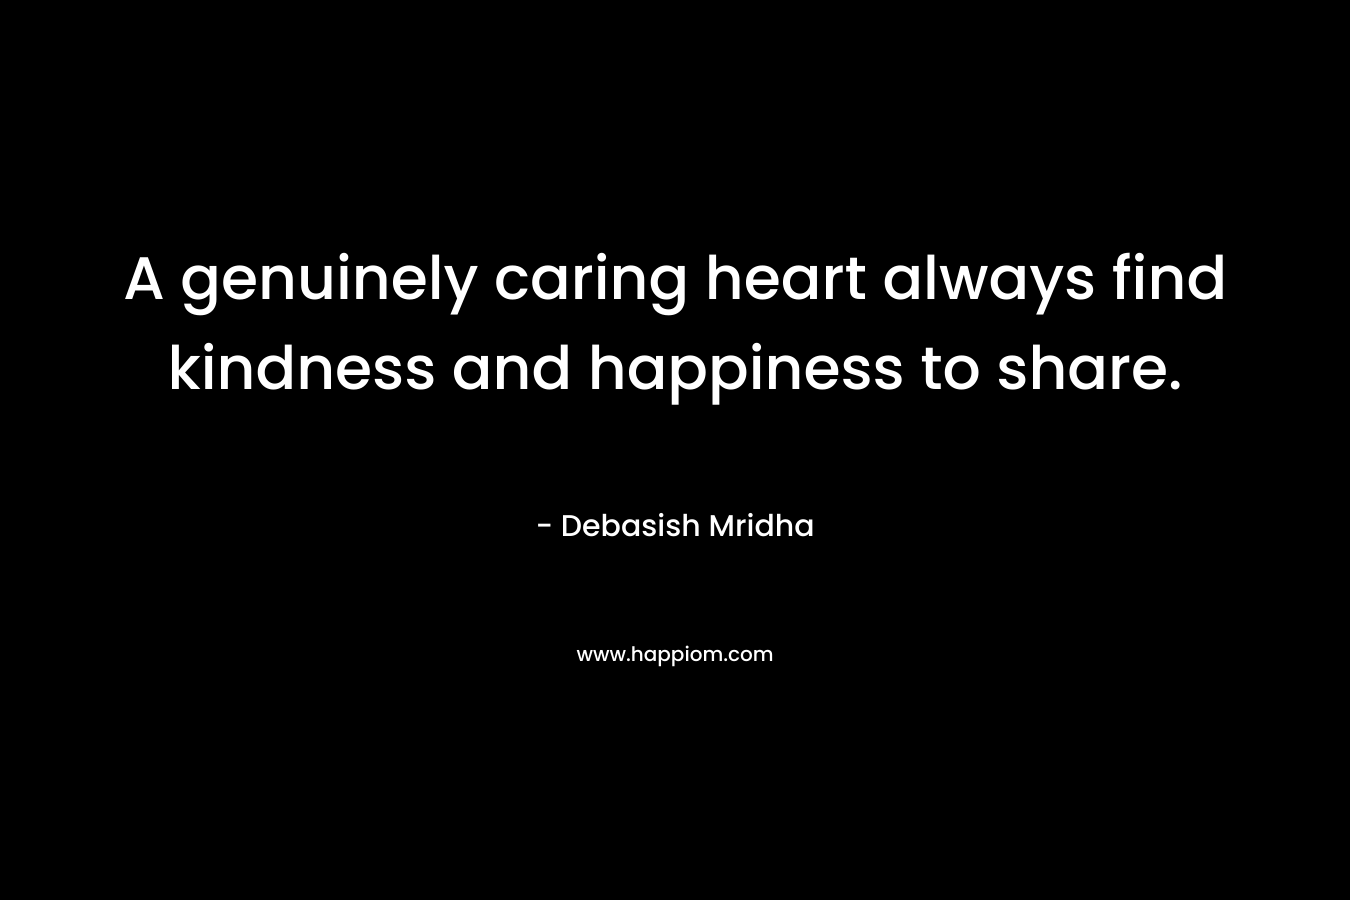 A genuinely caring heart always find kindness and happiness to share.